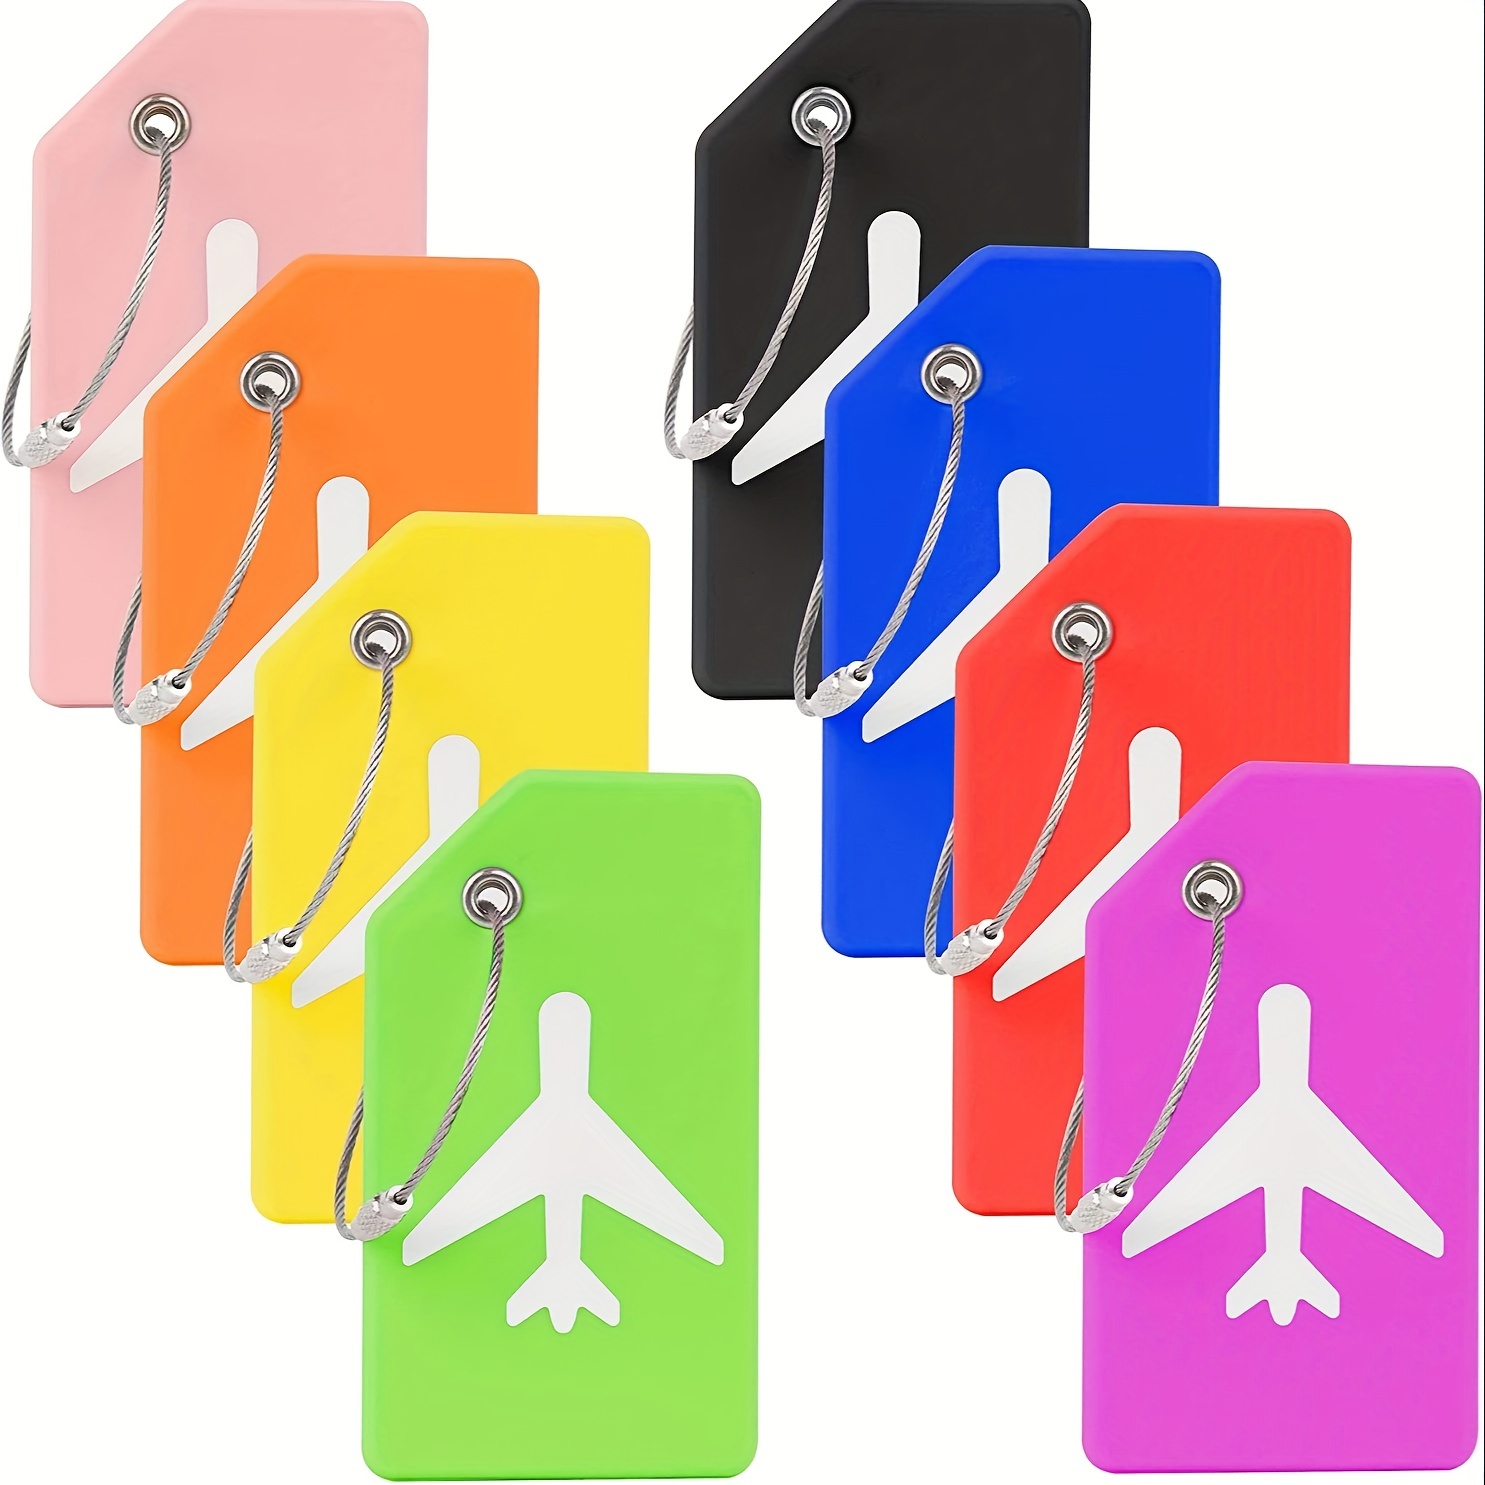 5 8pcs Silicone Luggage Tag Baggage Handbag Travel Suitcase Tags With Name  Id Card Perfect To Quickly Spot Luggage Suitcase, High-quality &  Affordable